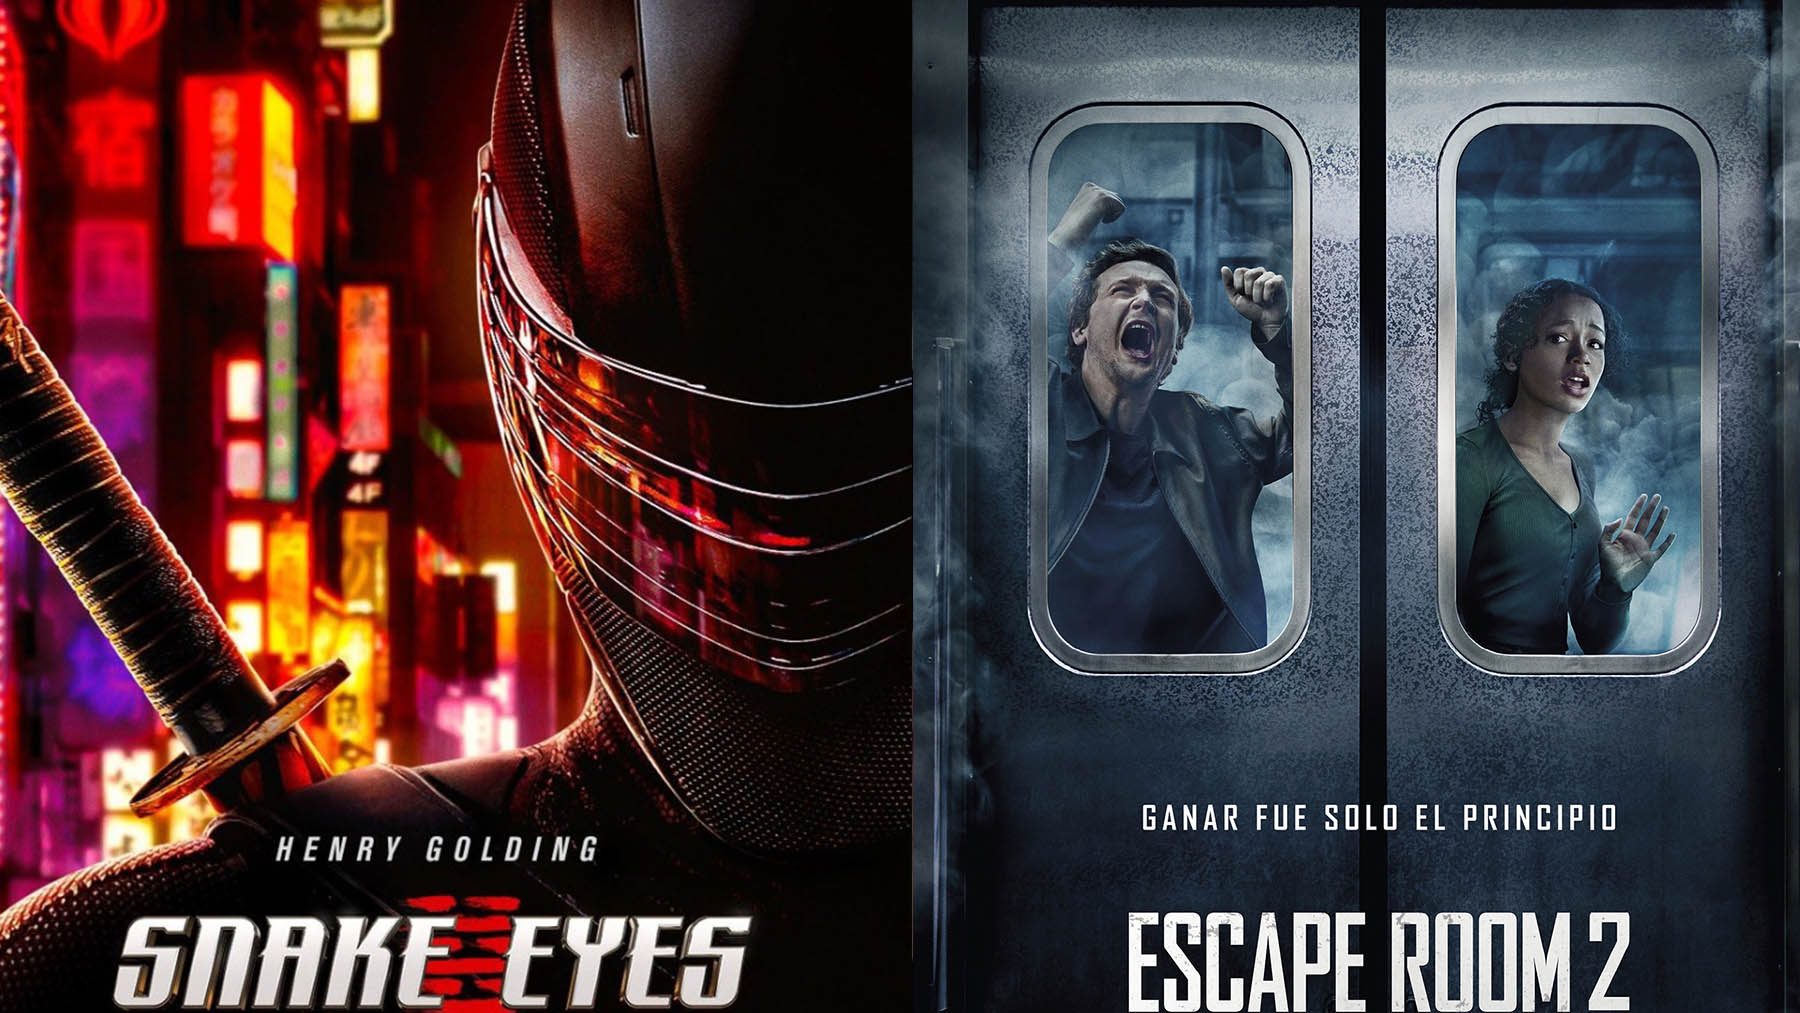 «Snake eyes» (Paramount Pictures) y «Escape Room 2» (Sony Pictures)